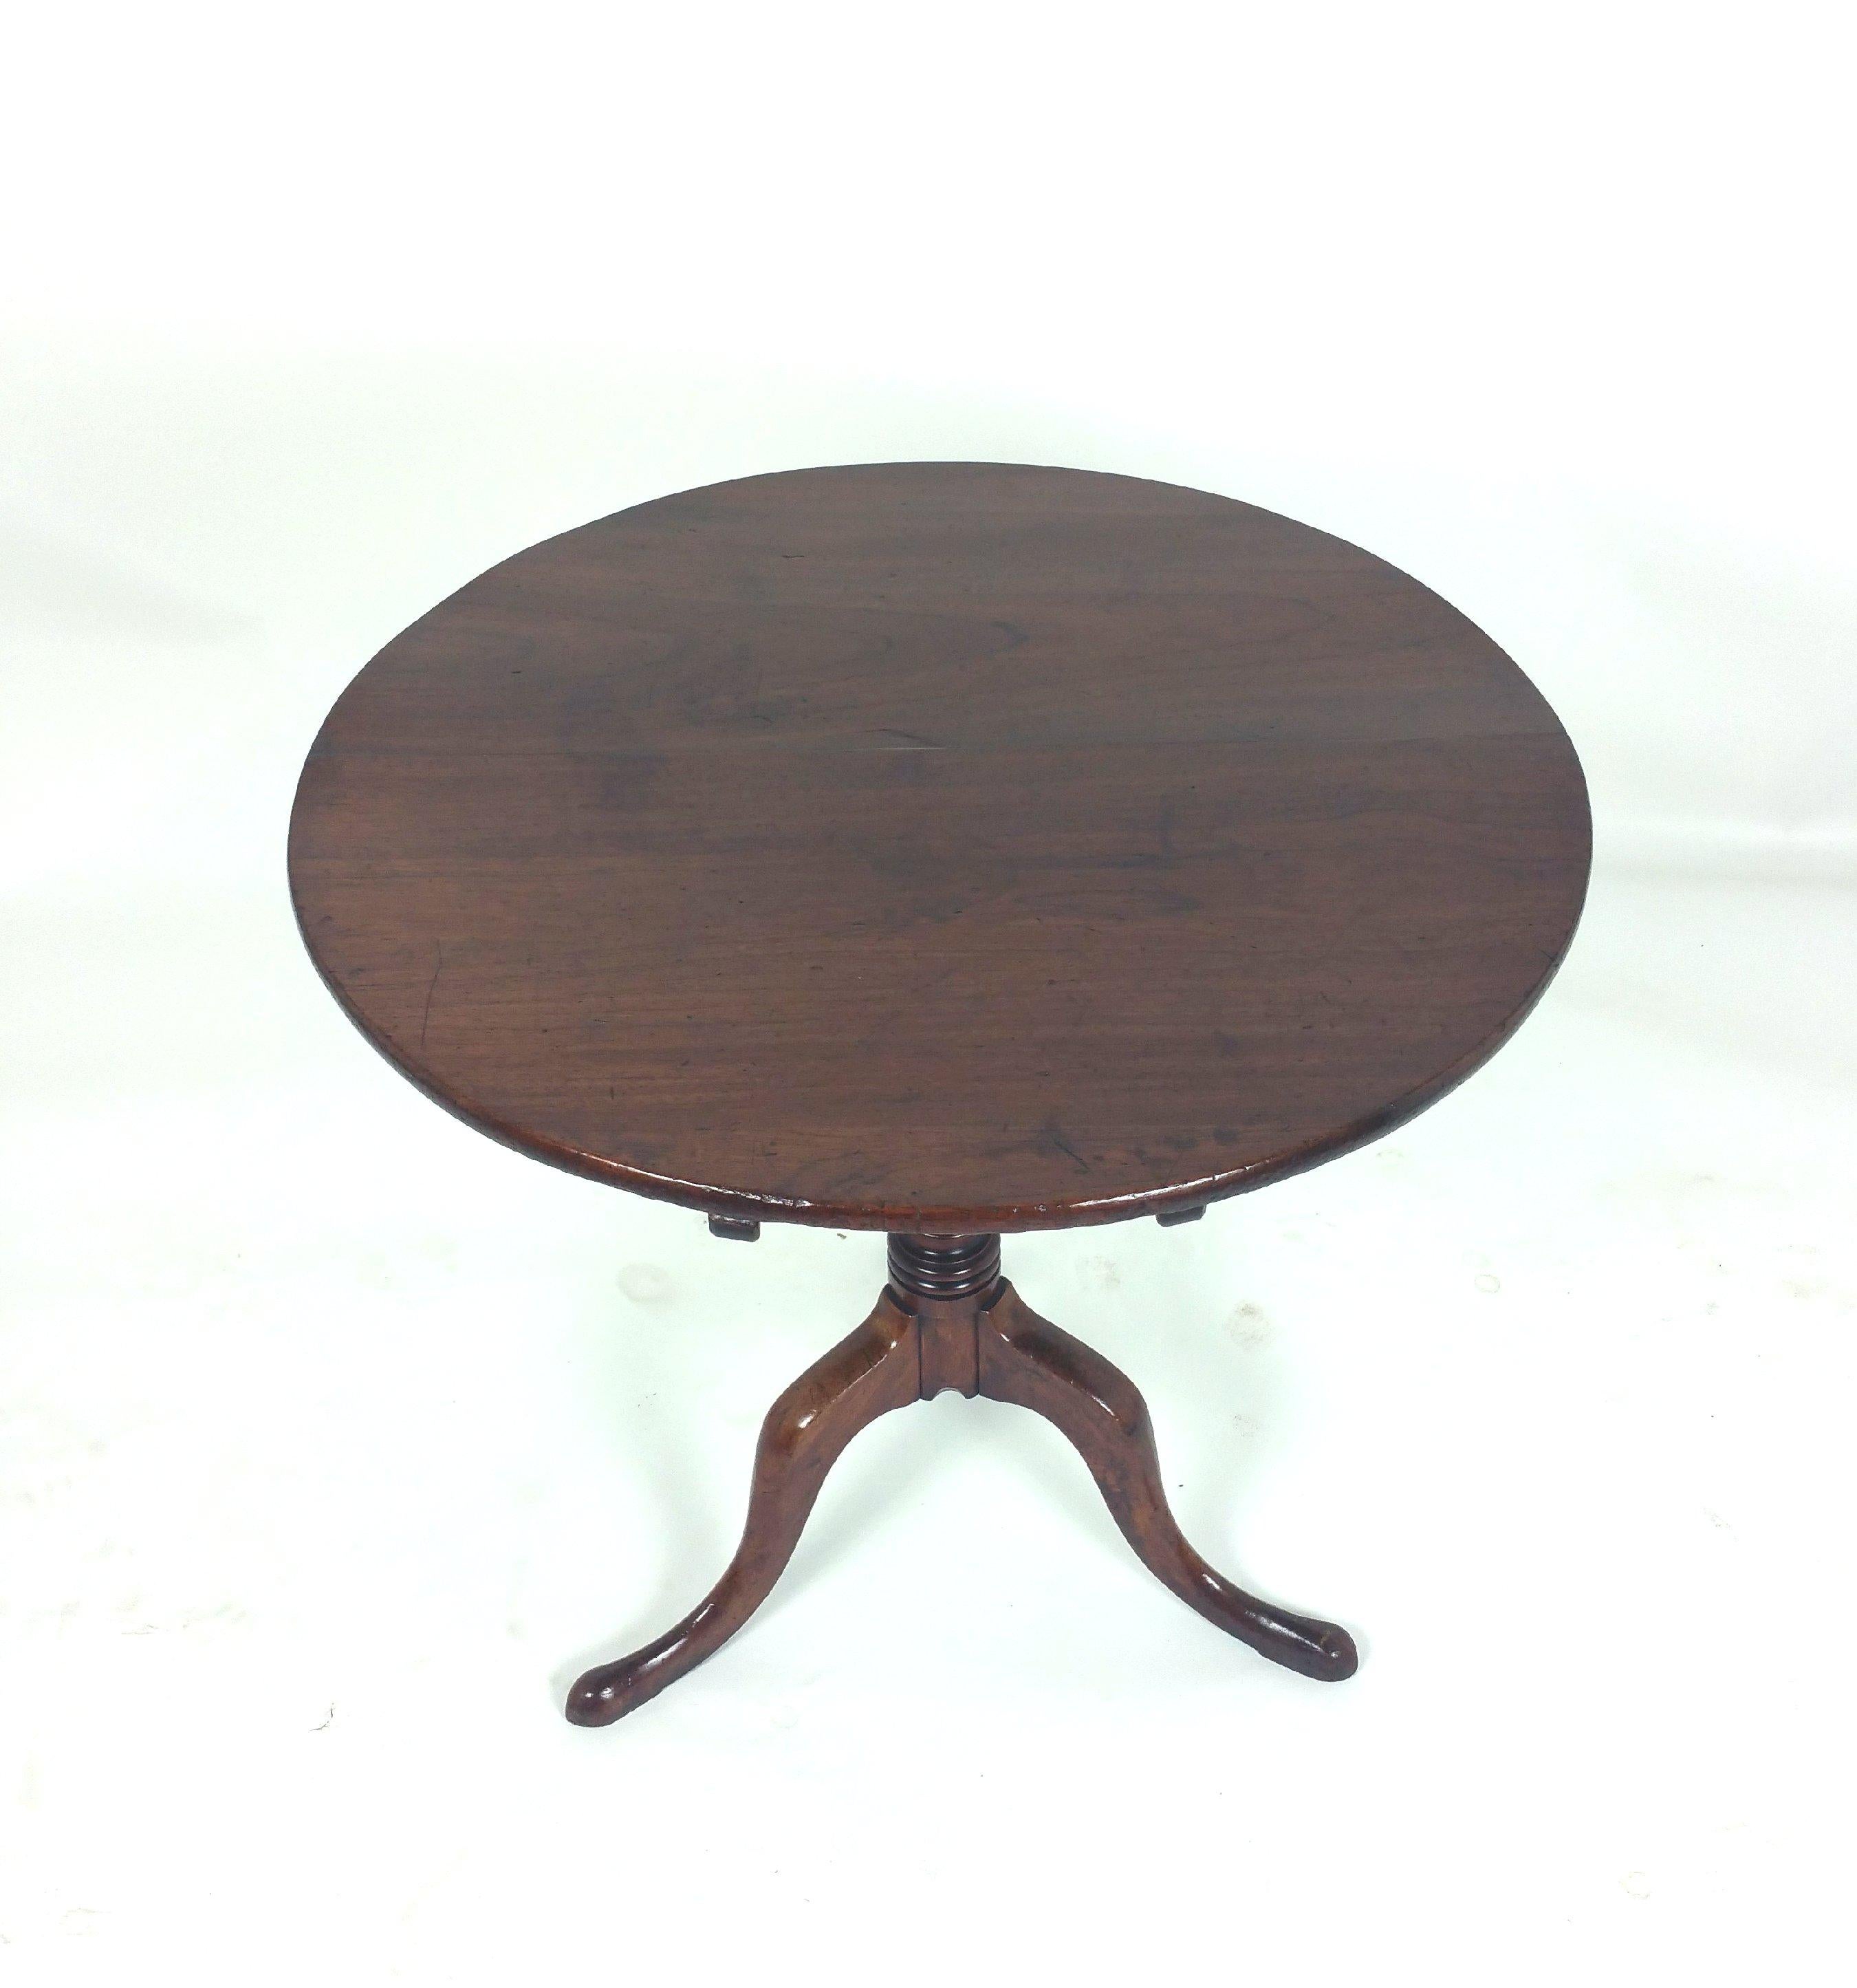 This wonderful 18th century English fruitwood tilt top table features a solid planked top and is supported on a tripod base with pad feet. The table measures 32 in–81.2 cm in diameter and 28 in–71.1 cm in height. It’s simple yet classic design makes